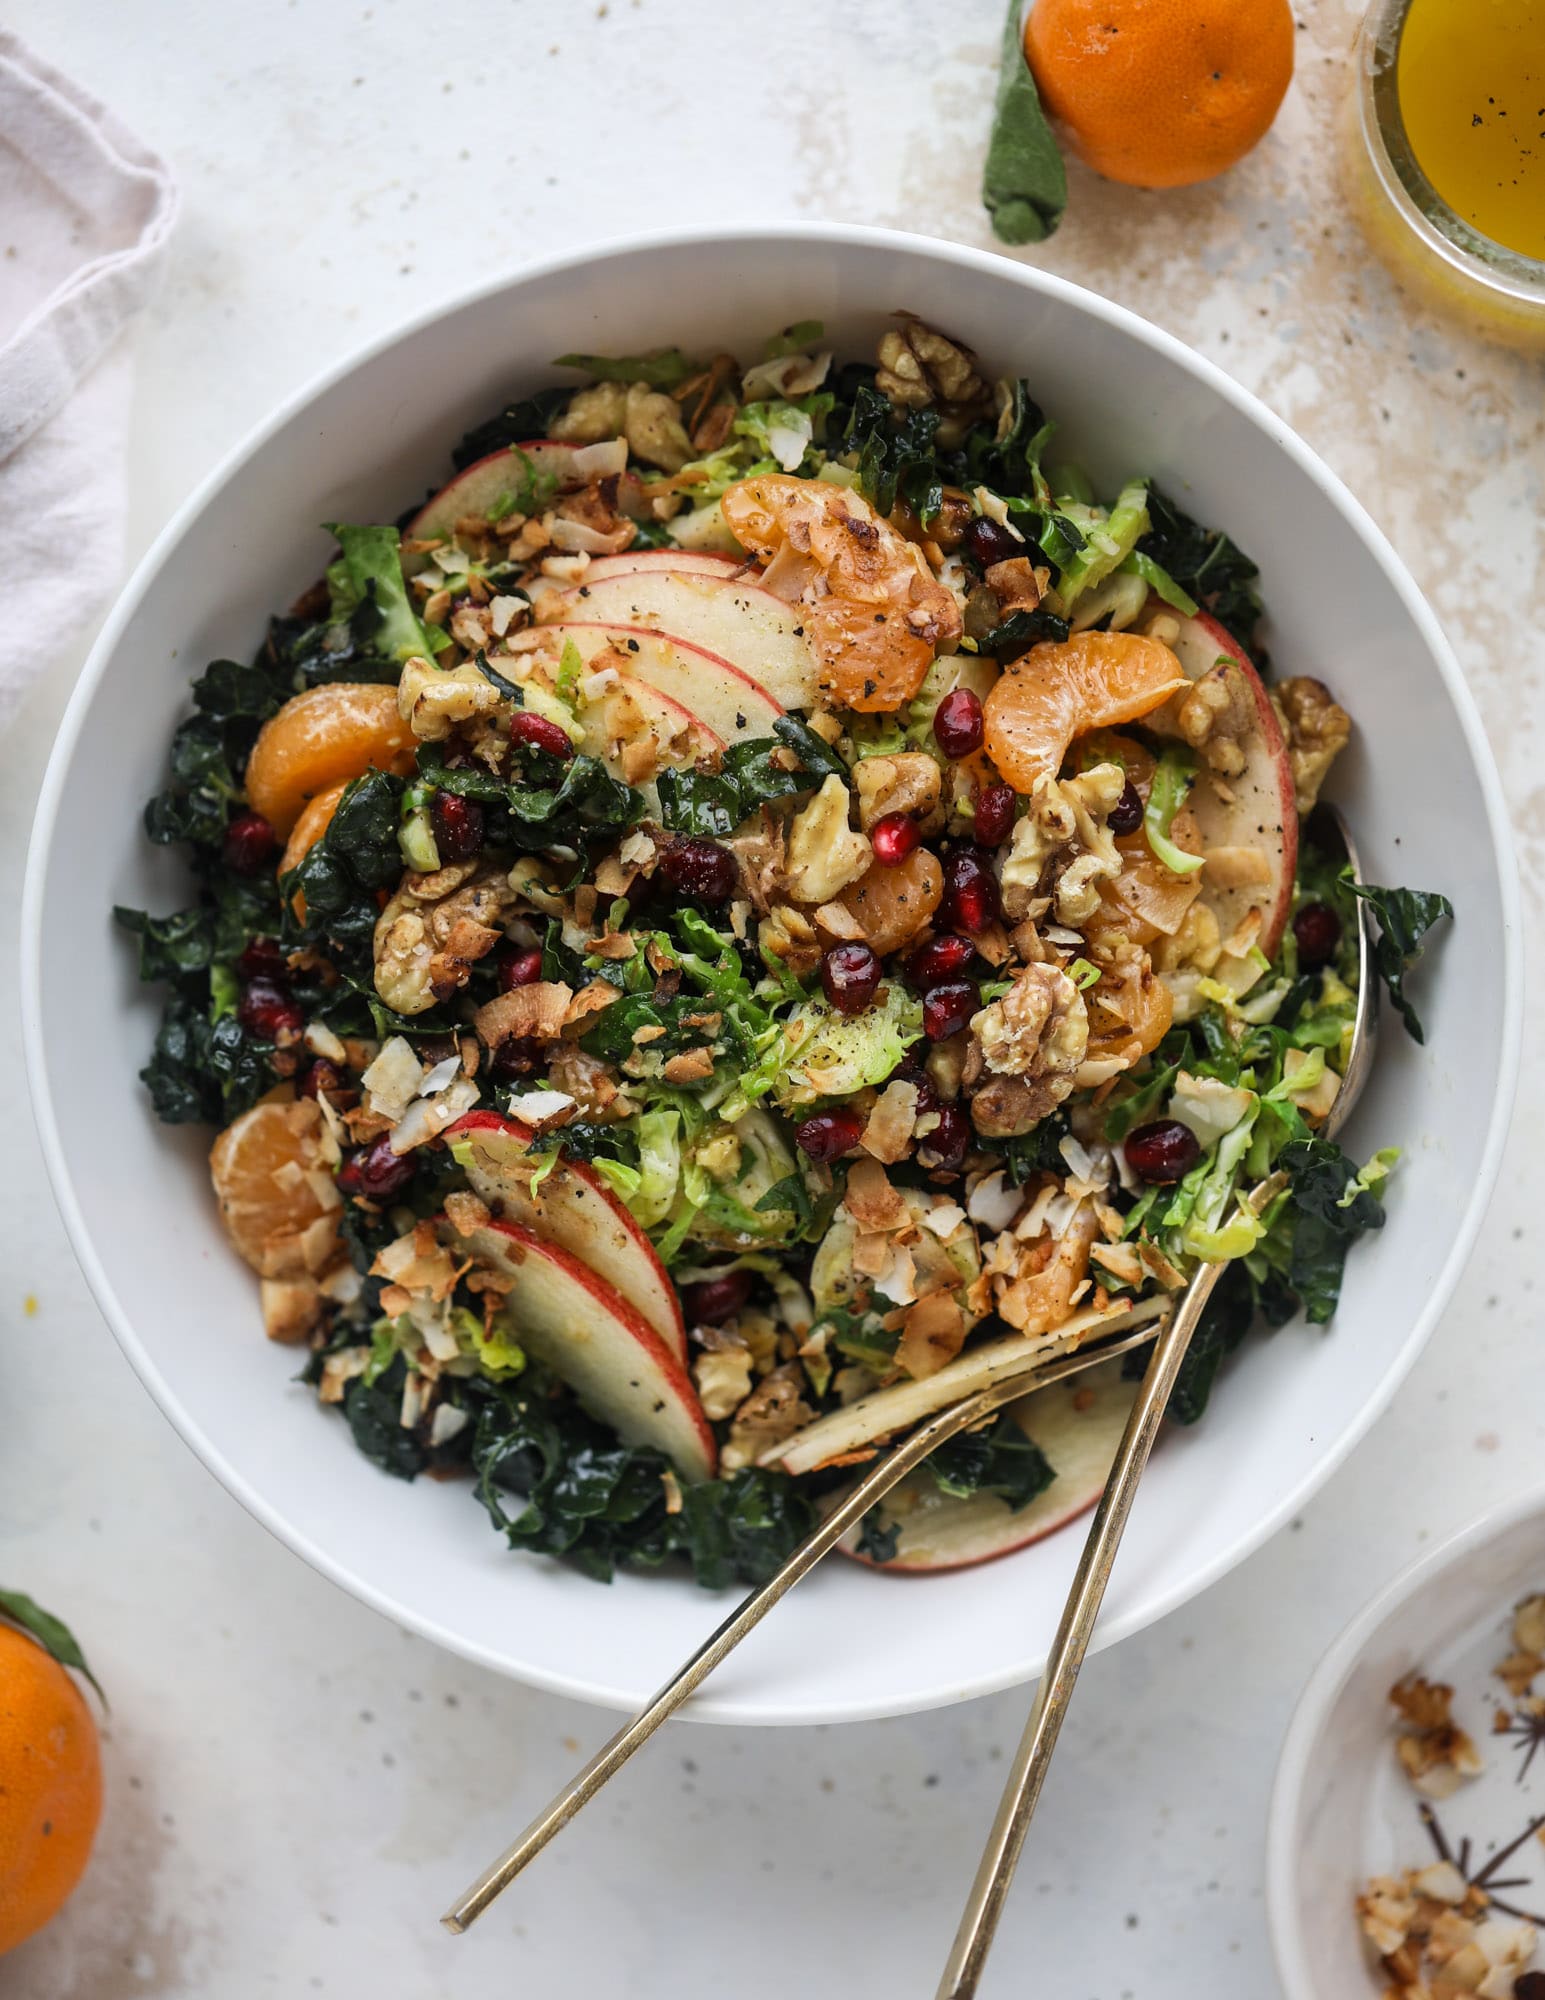 This winter crunch salad is loaded with tons of delicious, crunchy seasonal ingredients. A base of brussels sprouts and kale is topped with sliced apples, satsuma wedges, pomegranate arils, toasted walnuts and savory flaked coconut crunch. Delish! I howsweeteats.com #winter #salad